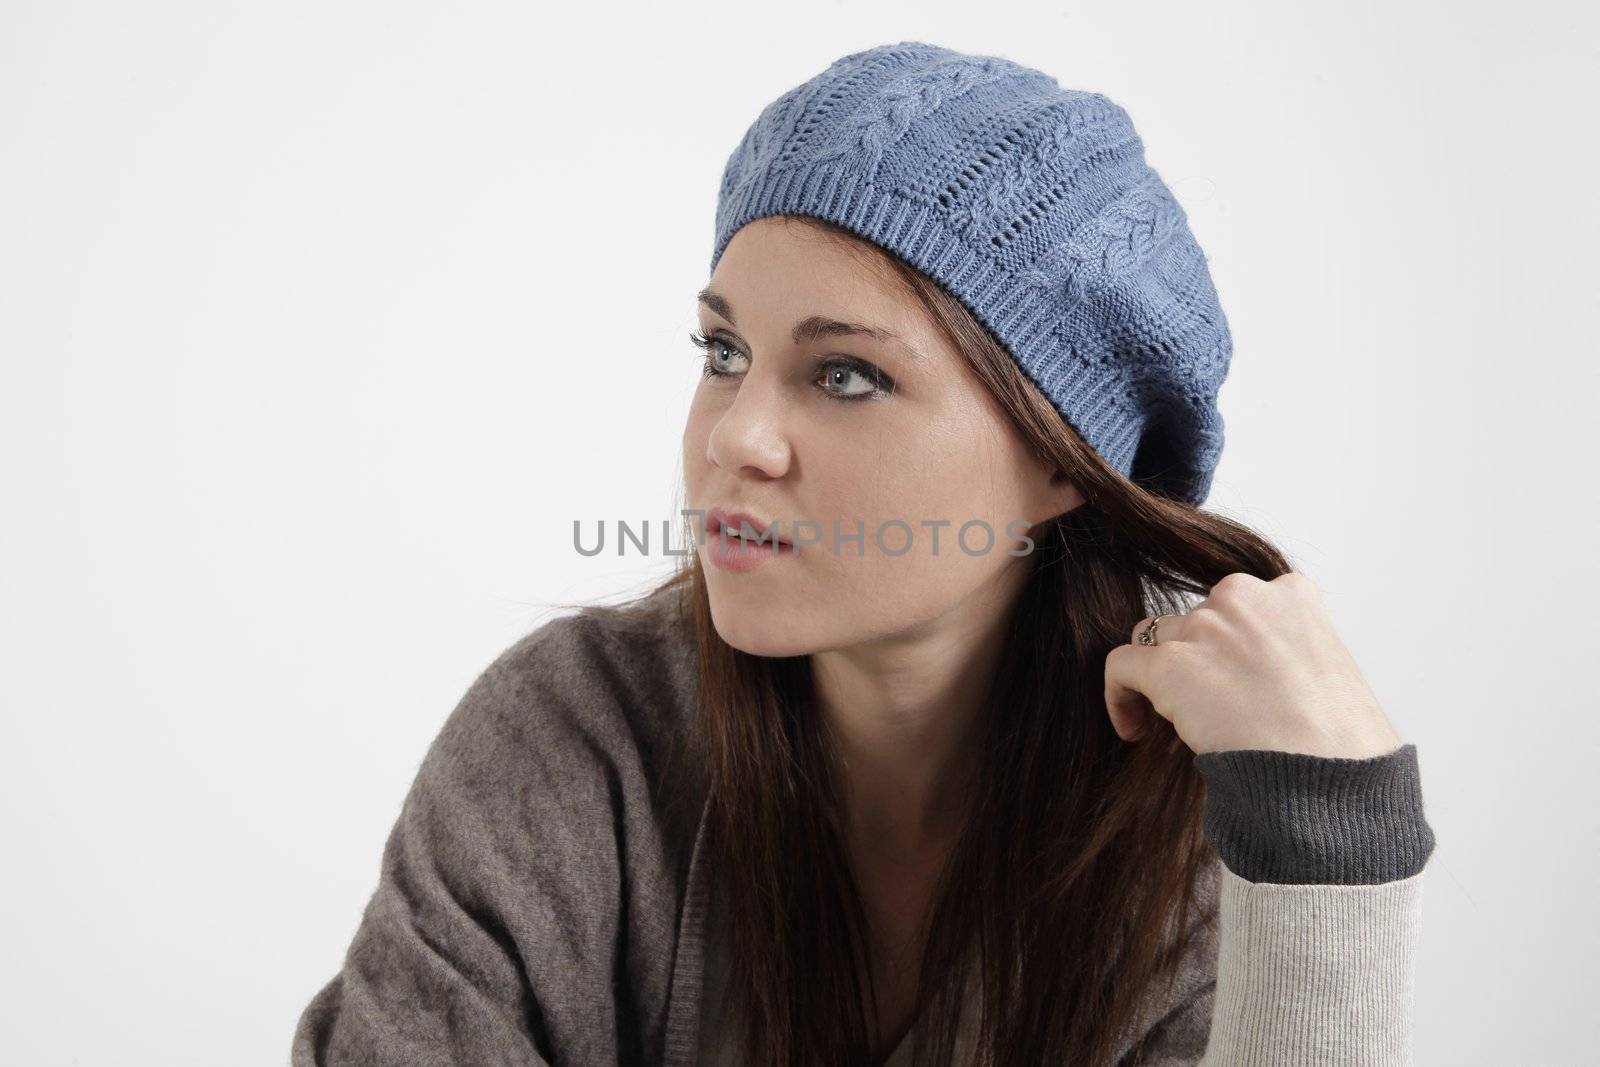 Young woman with blue cap